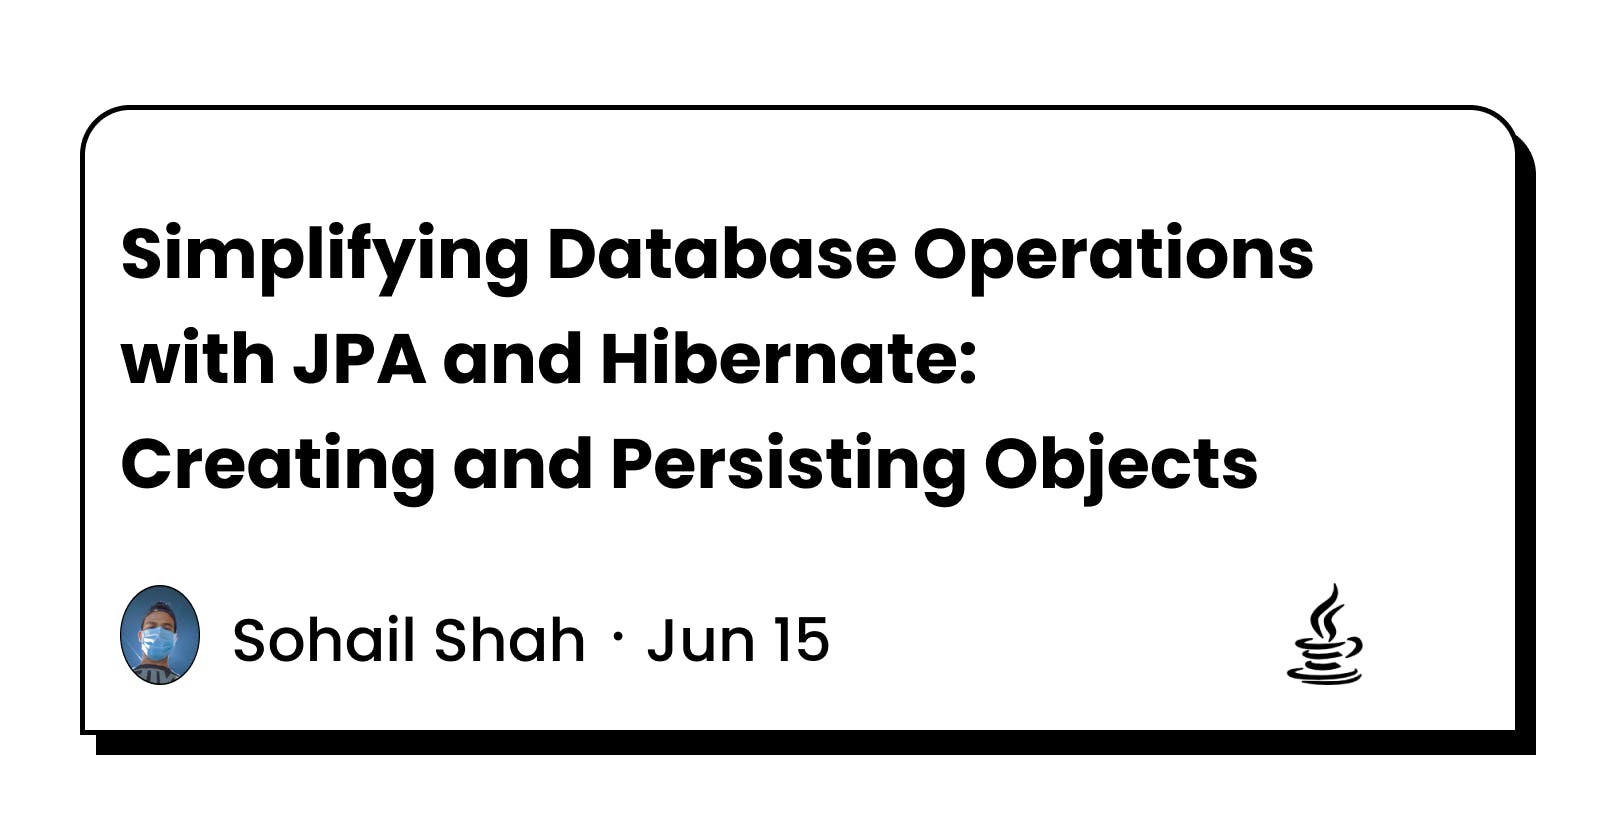 Simplifying Database Operations with JPA and Hibernate: Creating and Persisting Objects